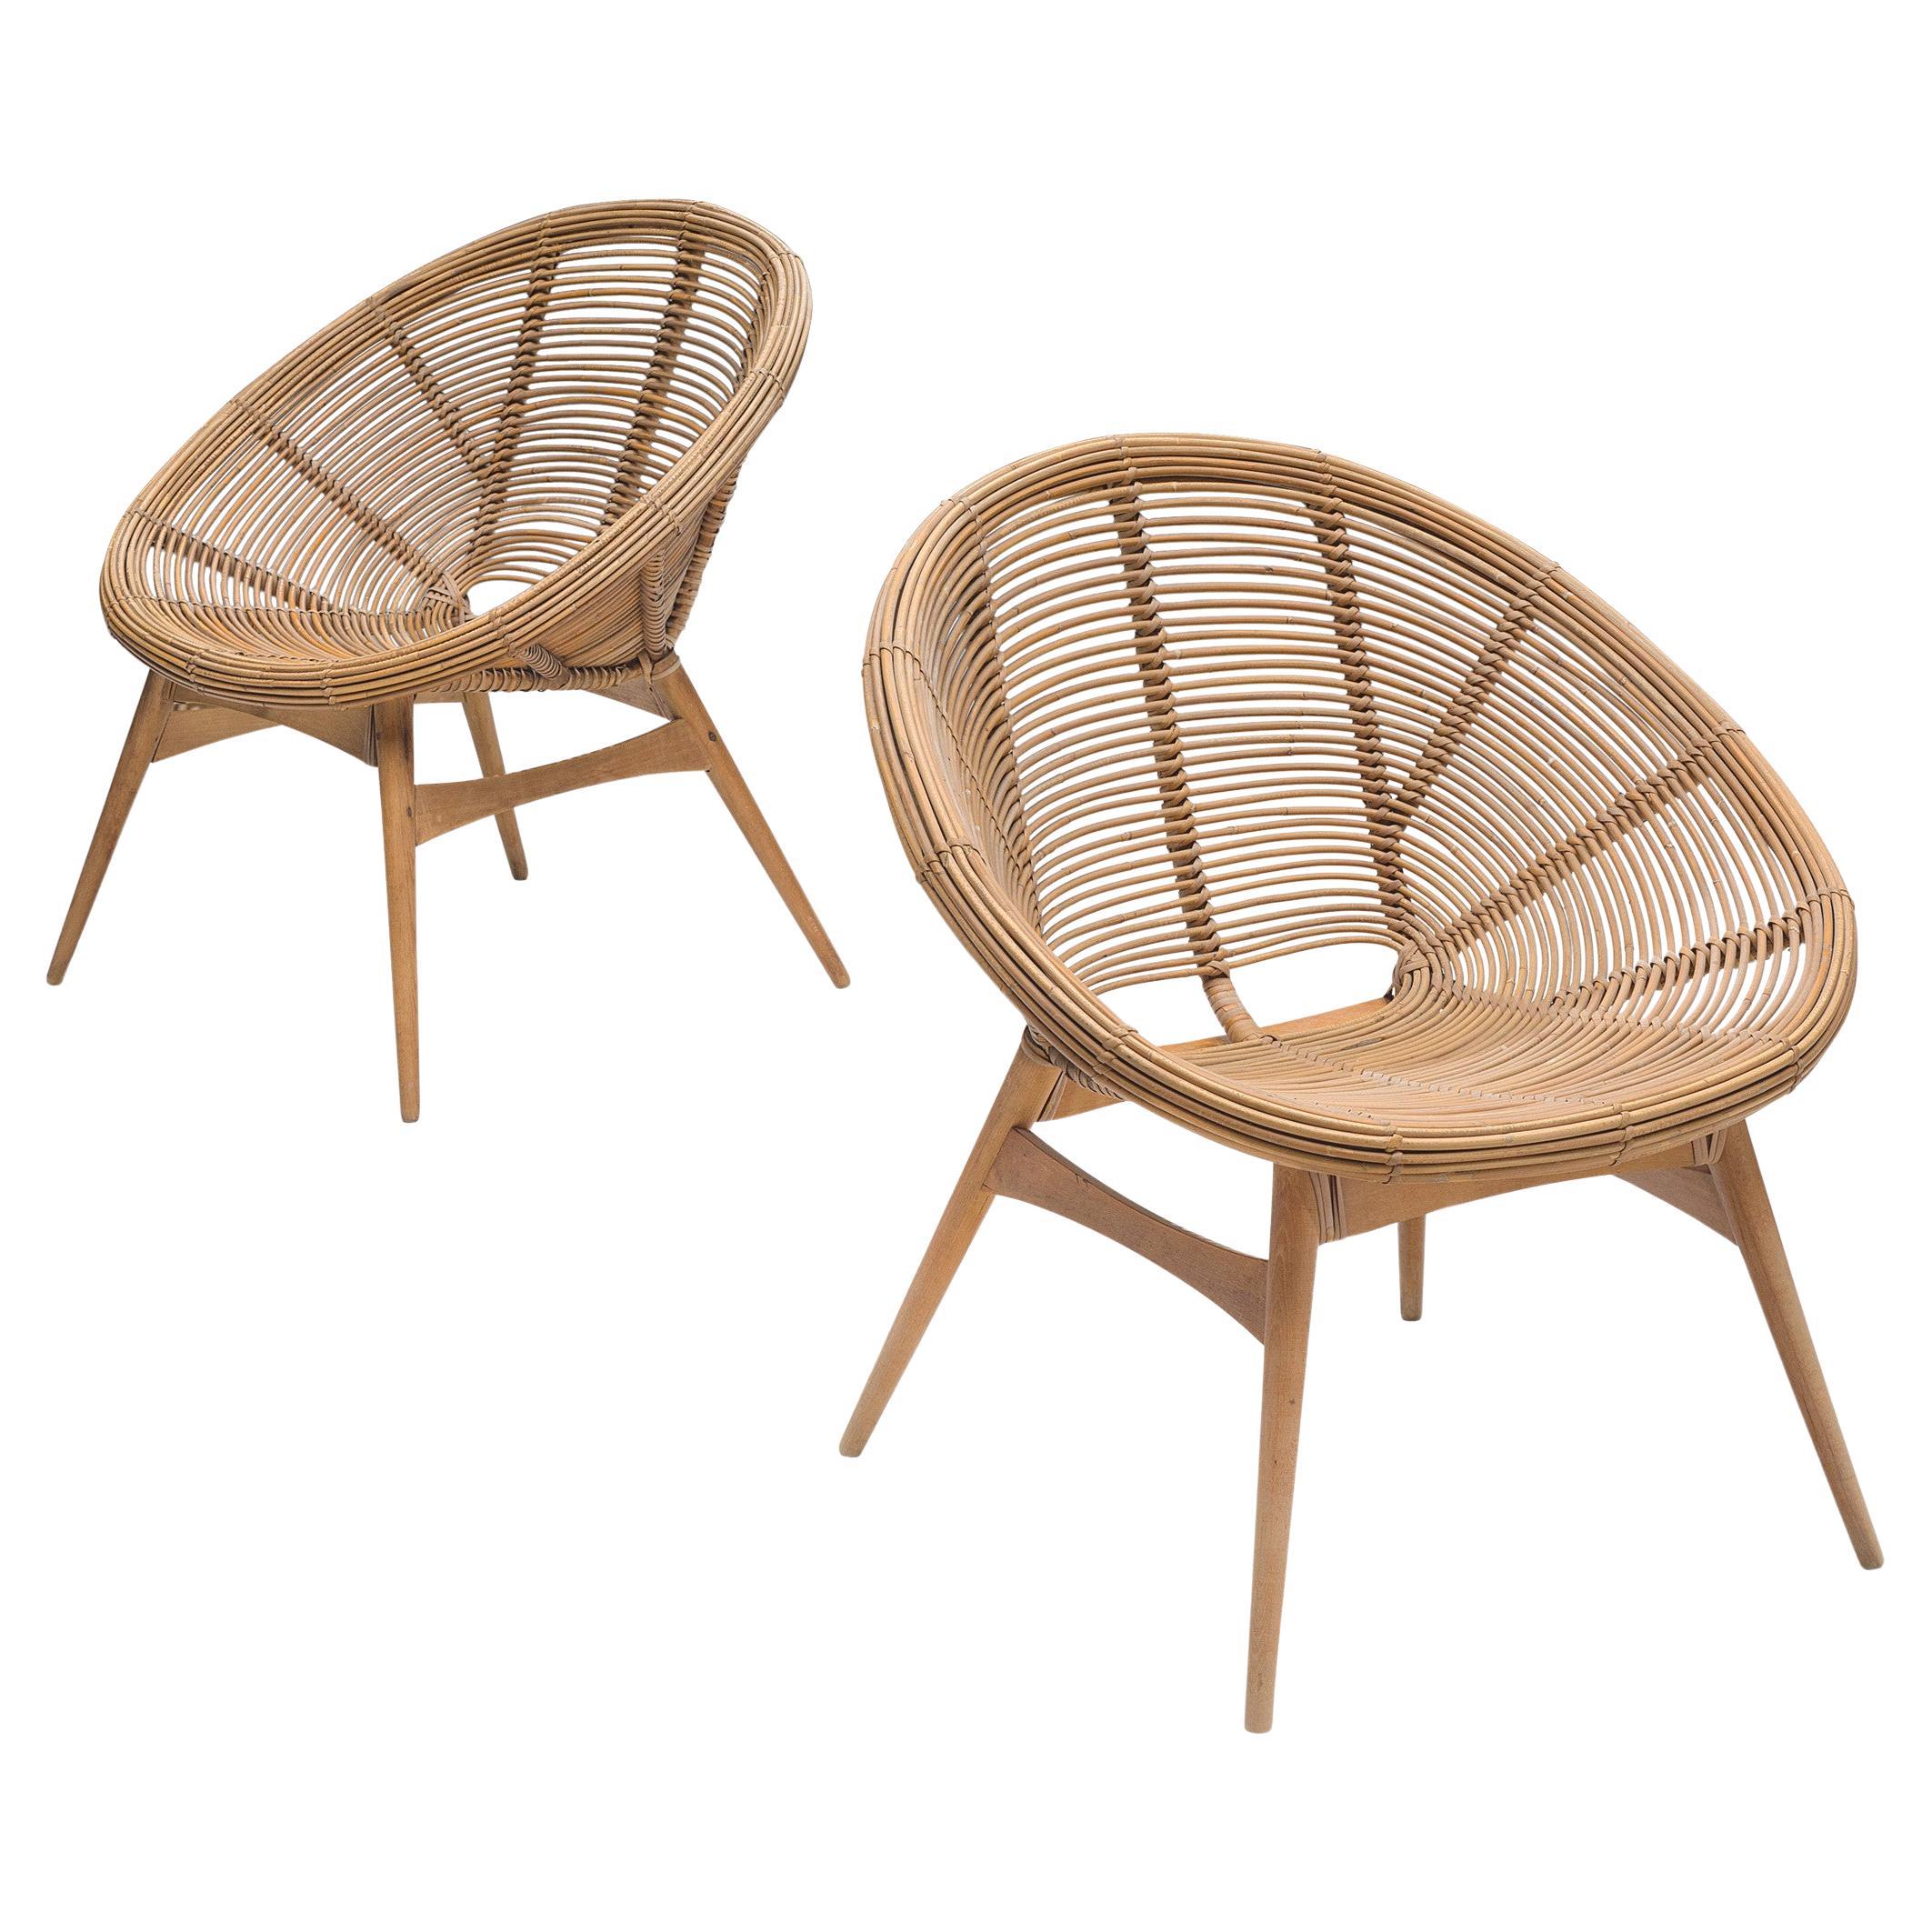 Are bamboo chairs strong?